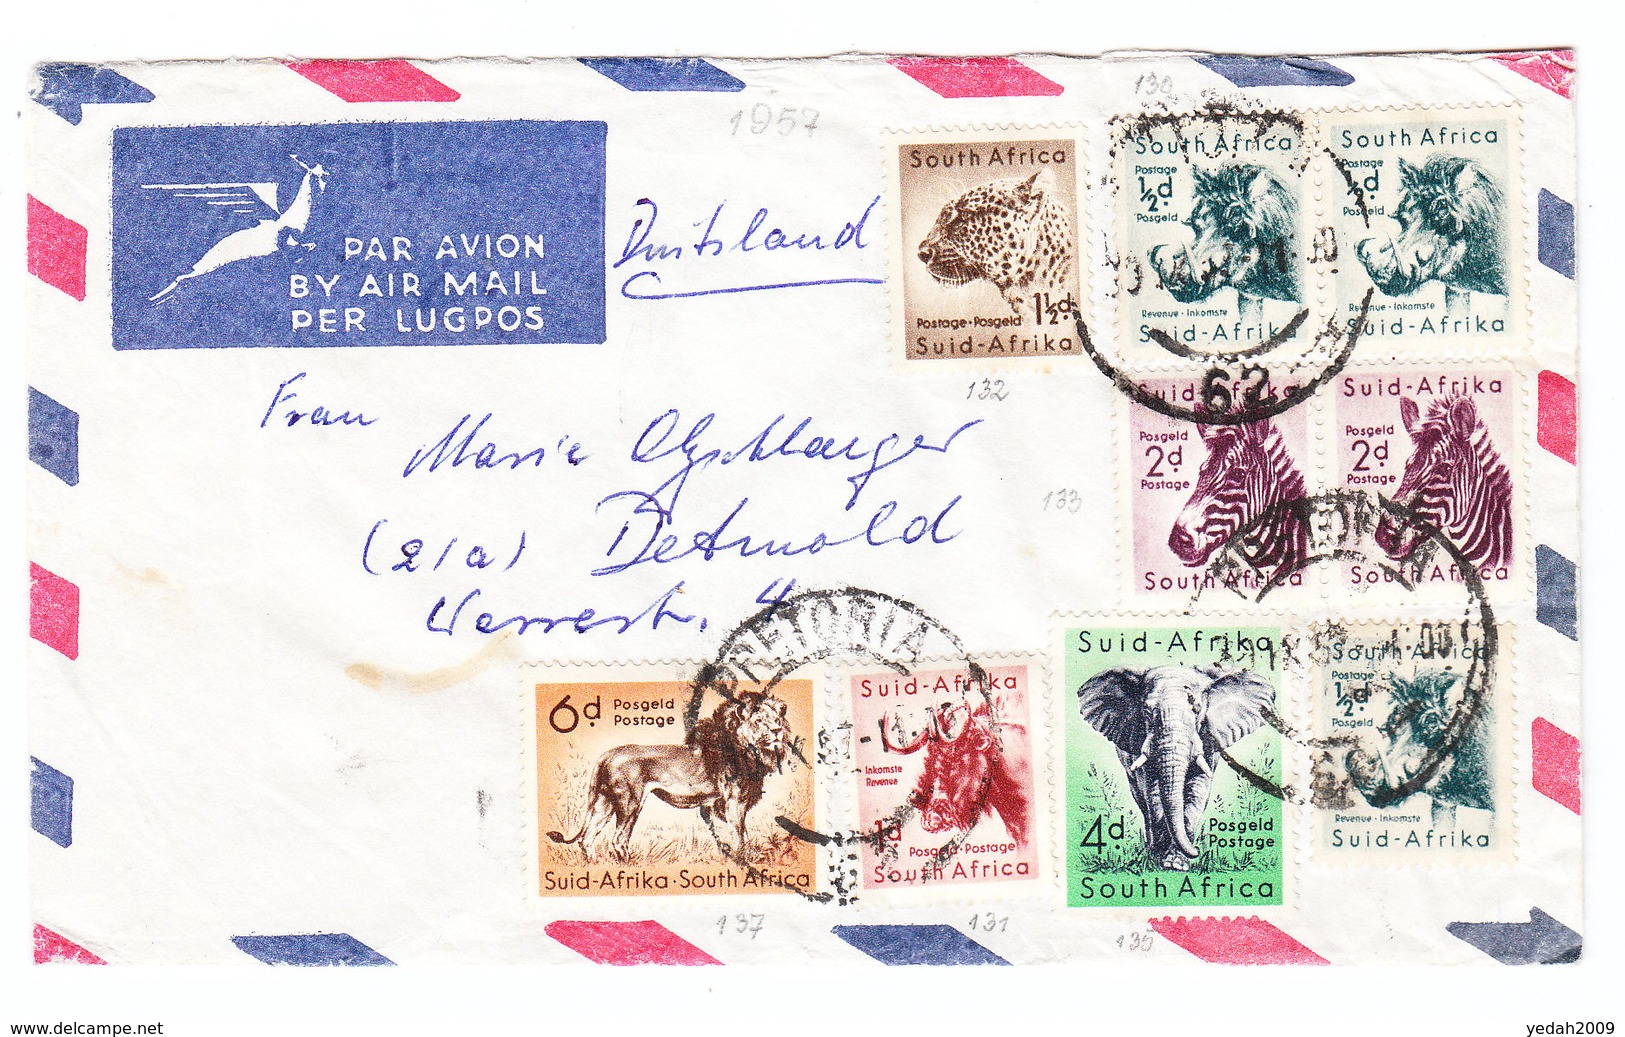 South Africa AIRMAIL COVER TO Germany 1957 - Airmail